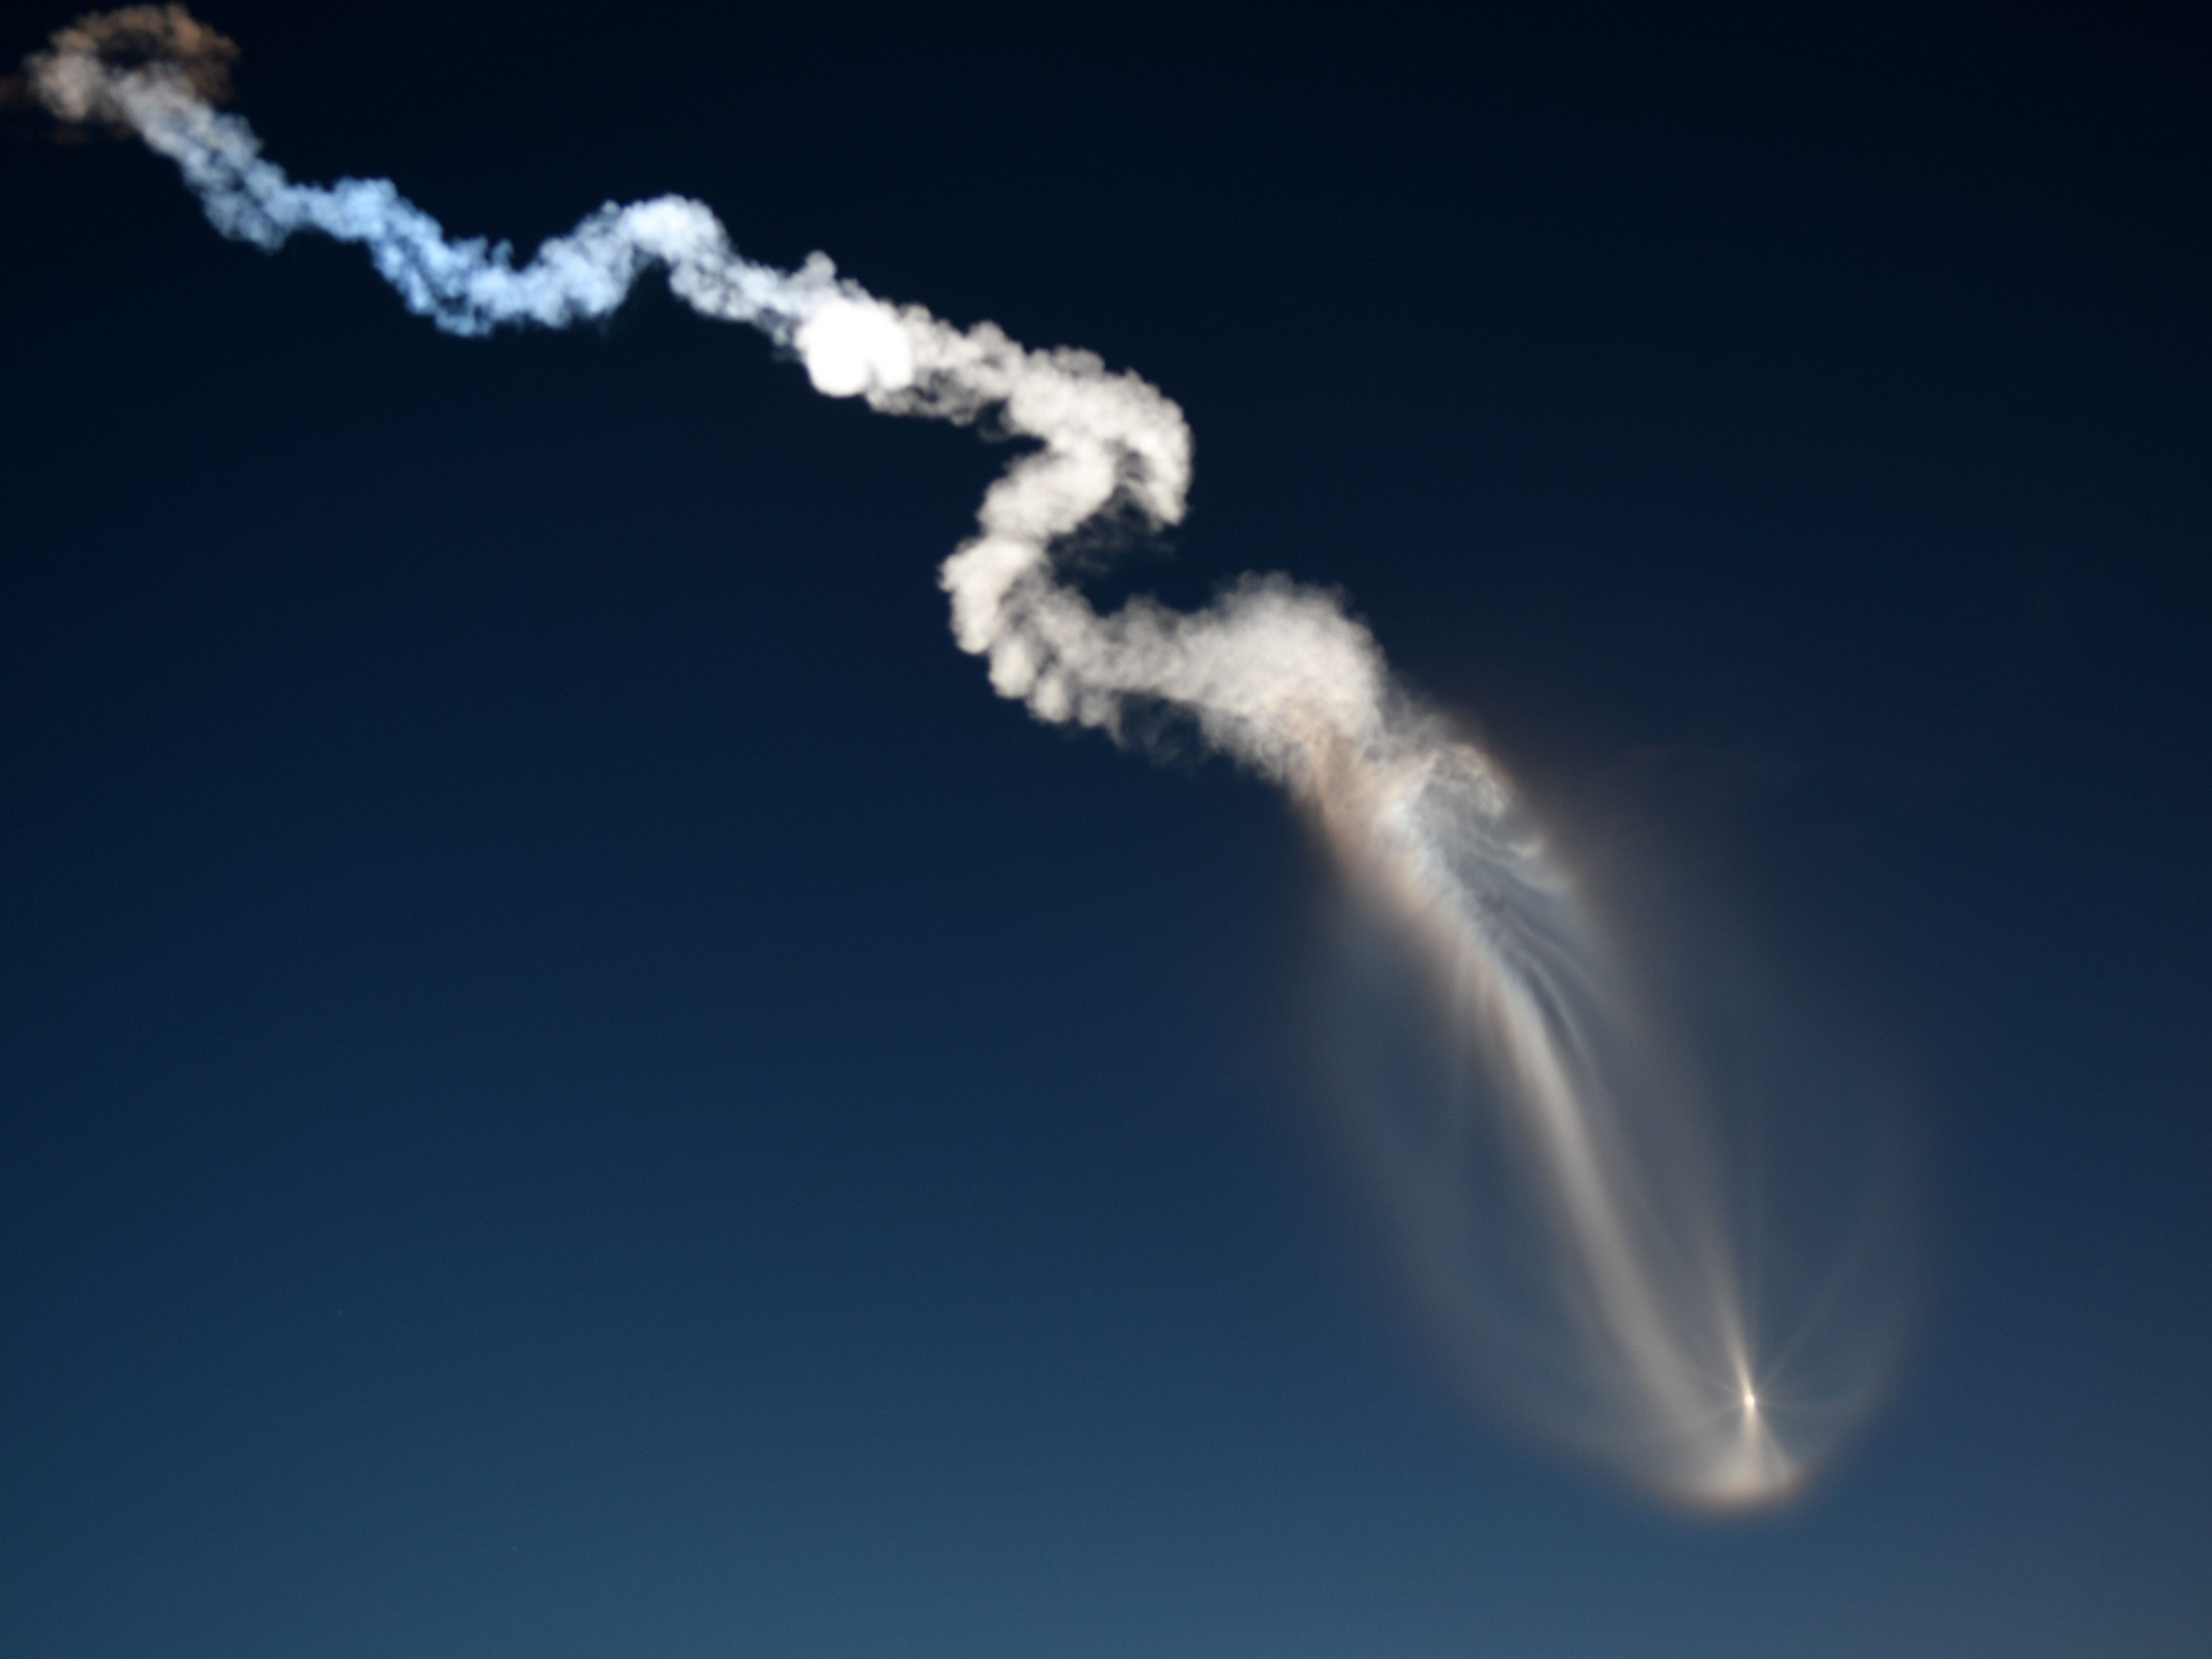 A United Launch Alliance Atlas V rocket blasted off Cape Canaveral Air Force Station Launch Complex 41 on Aug. 8, 2019.